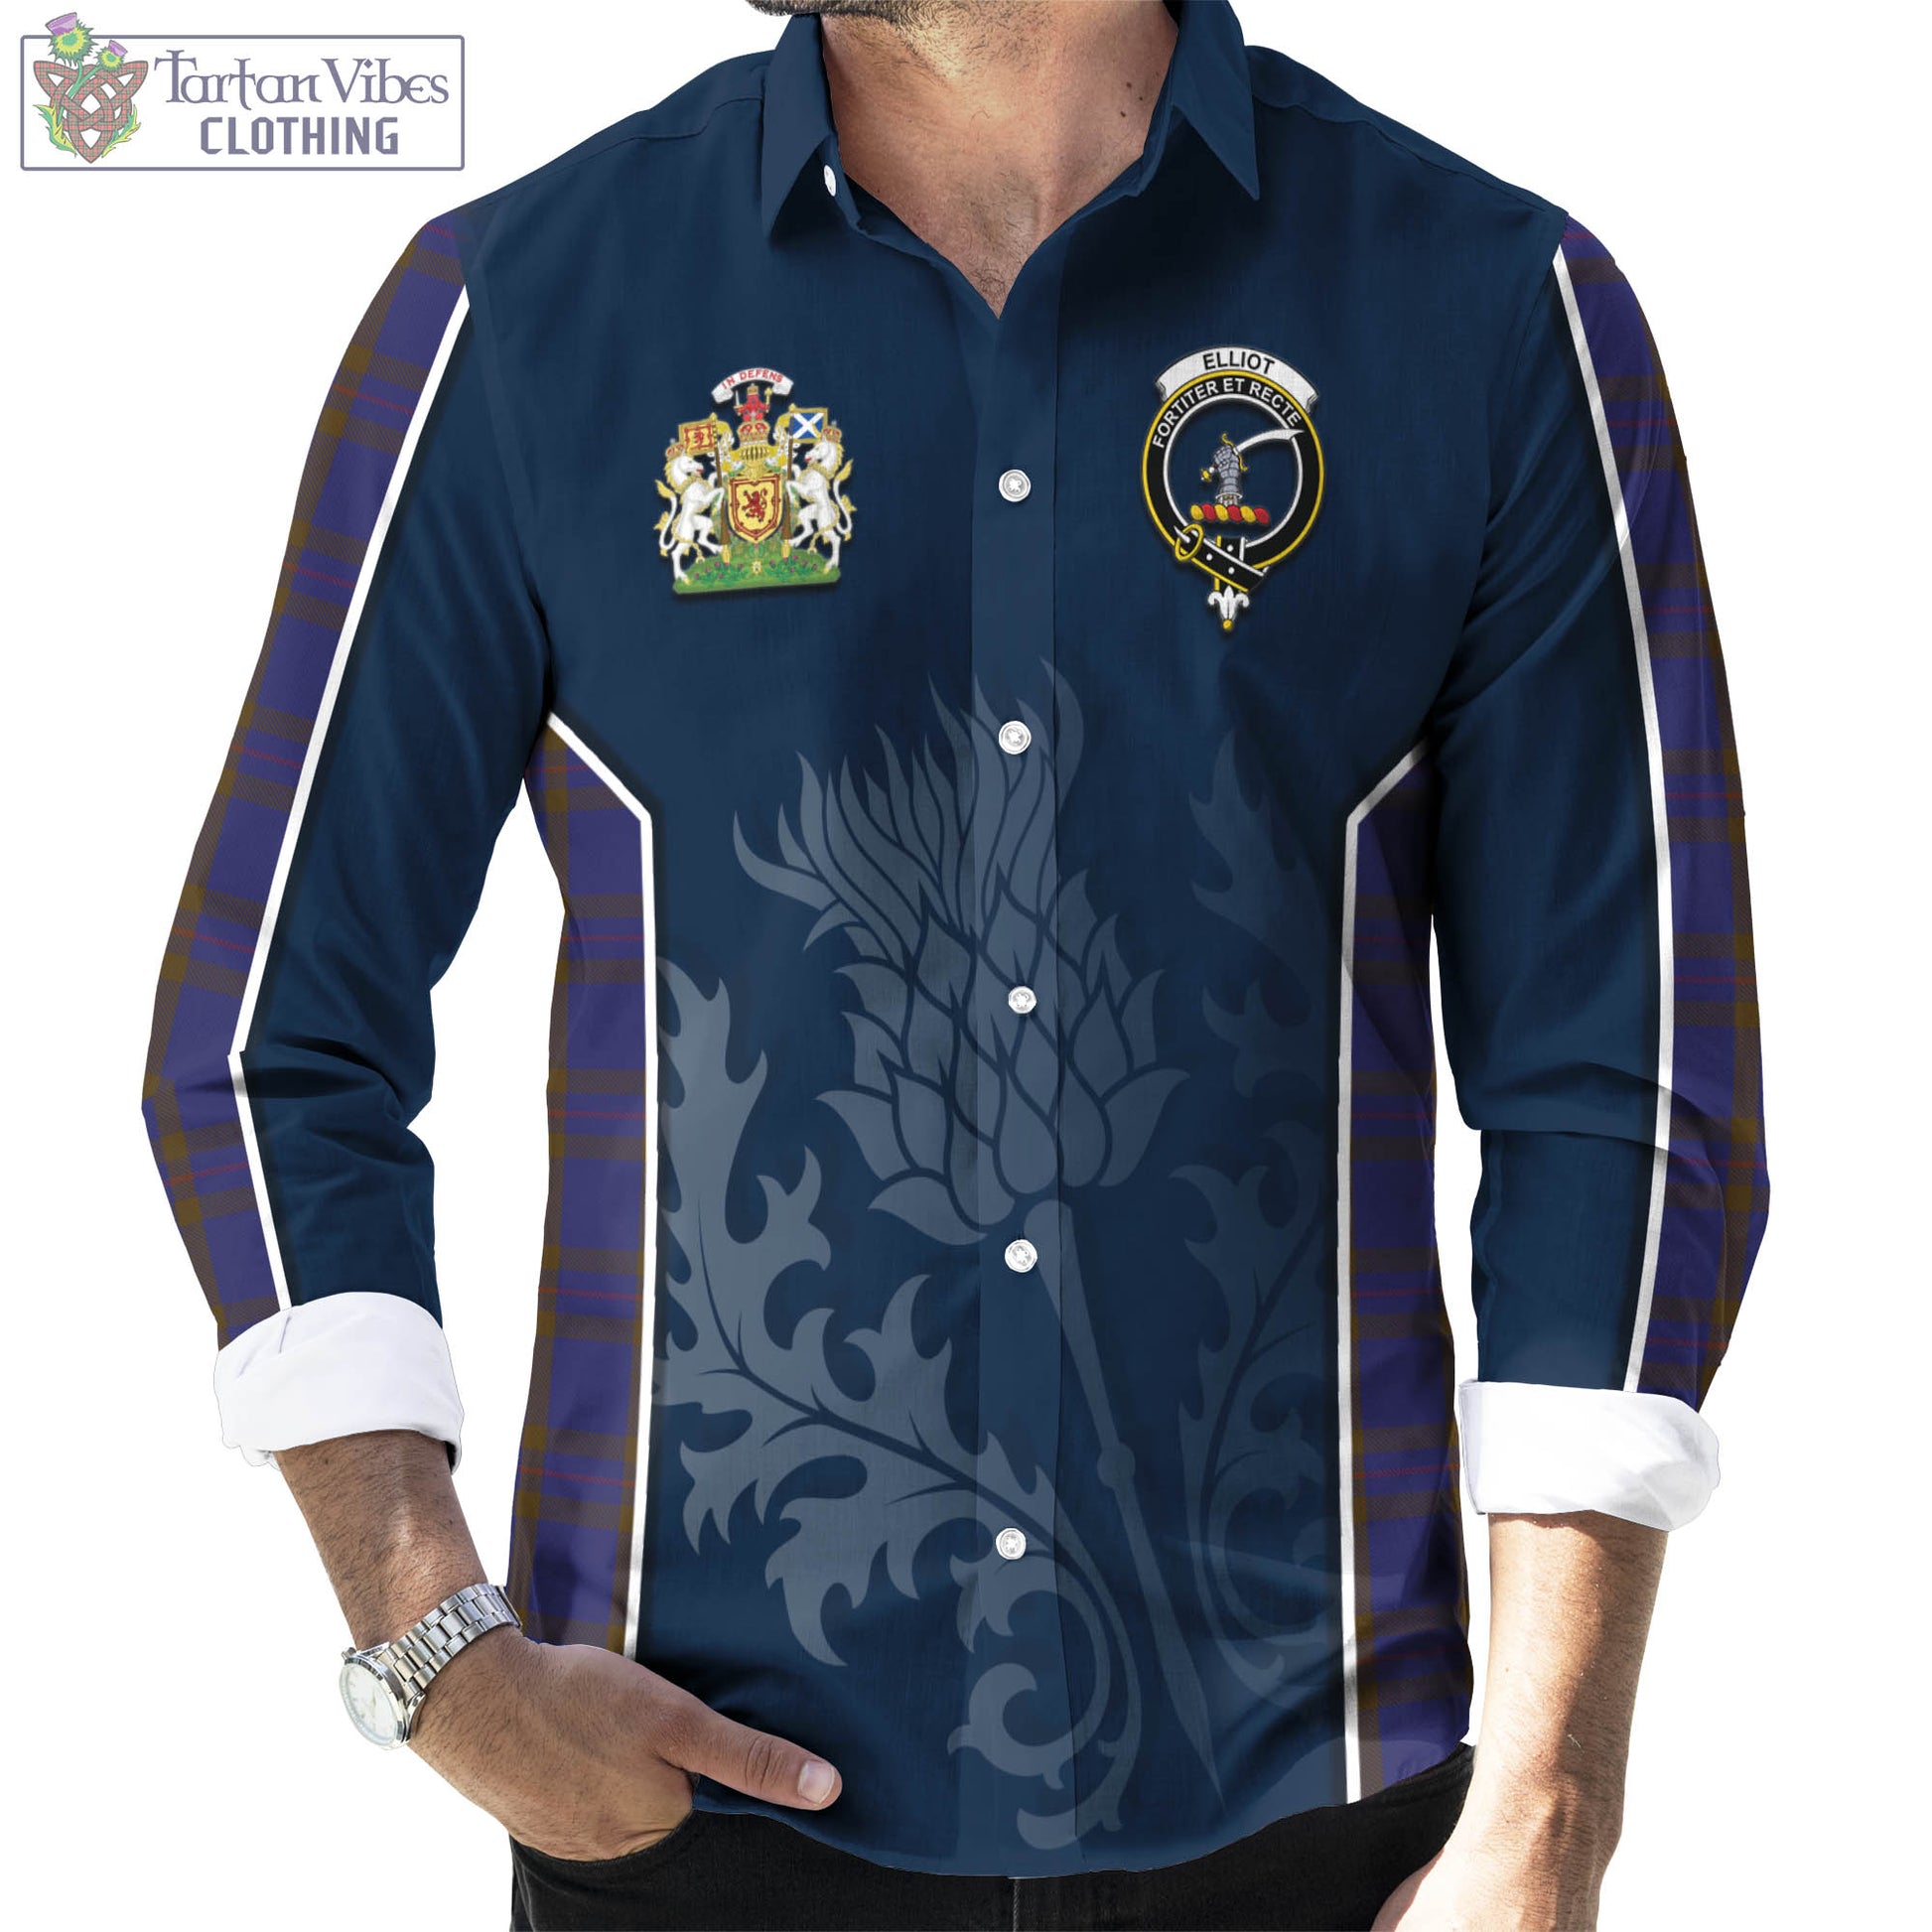 Tartan Vibes Clothing Elliot Tartan Long Sleeve Button Up Shirt with Family Crest and Scottish Thistle Vibes Sport Style